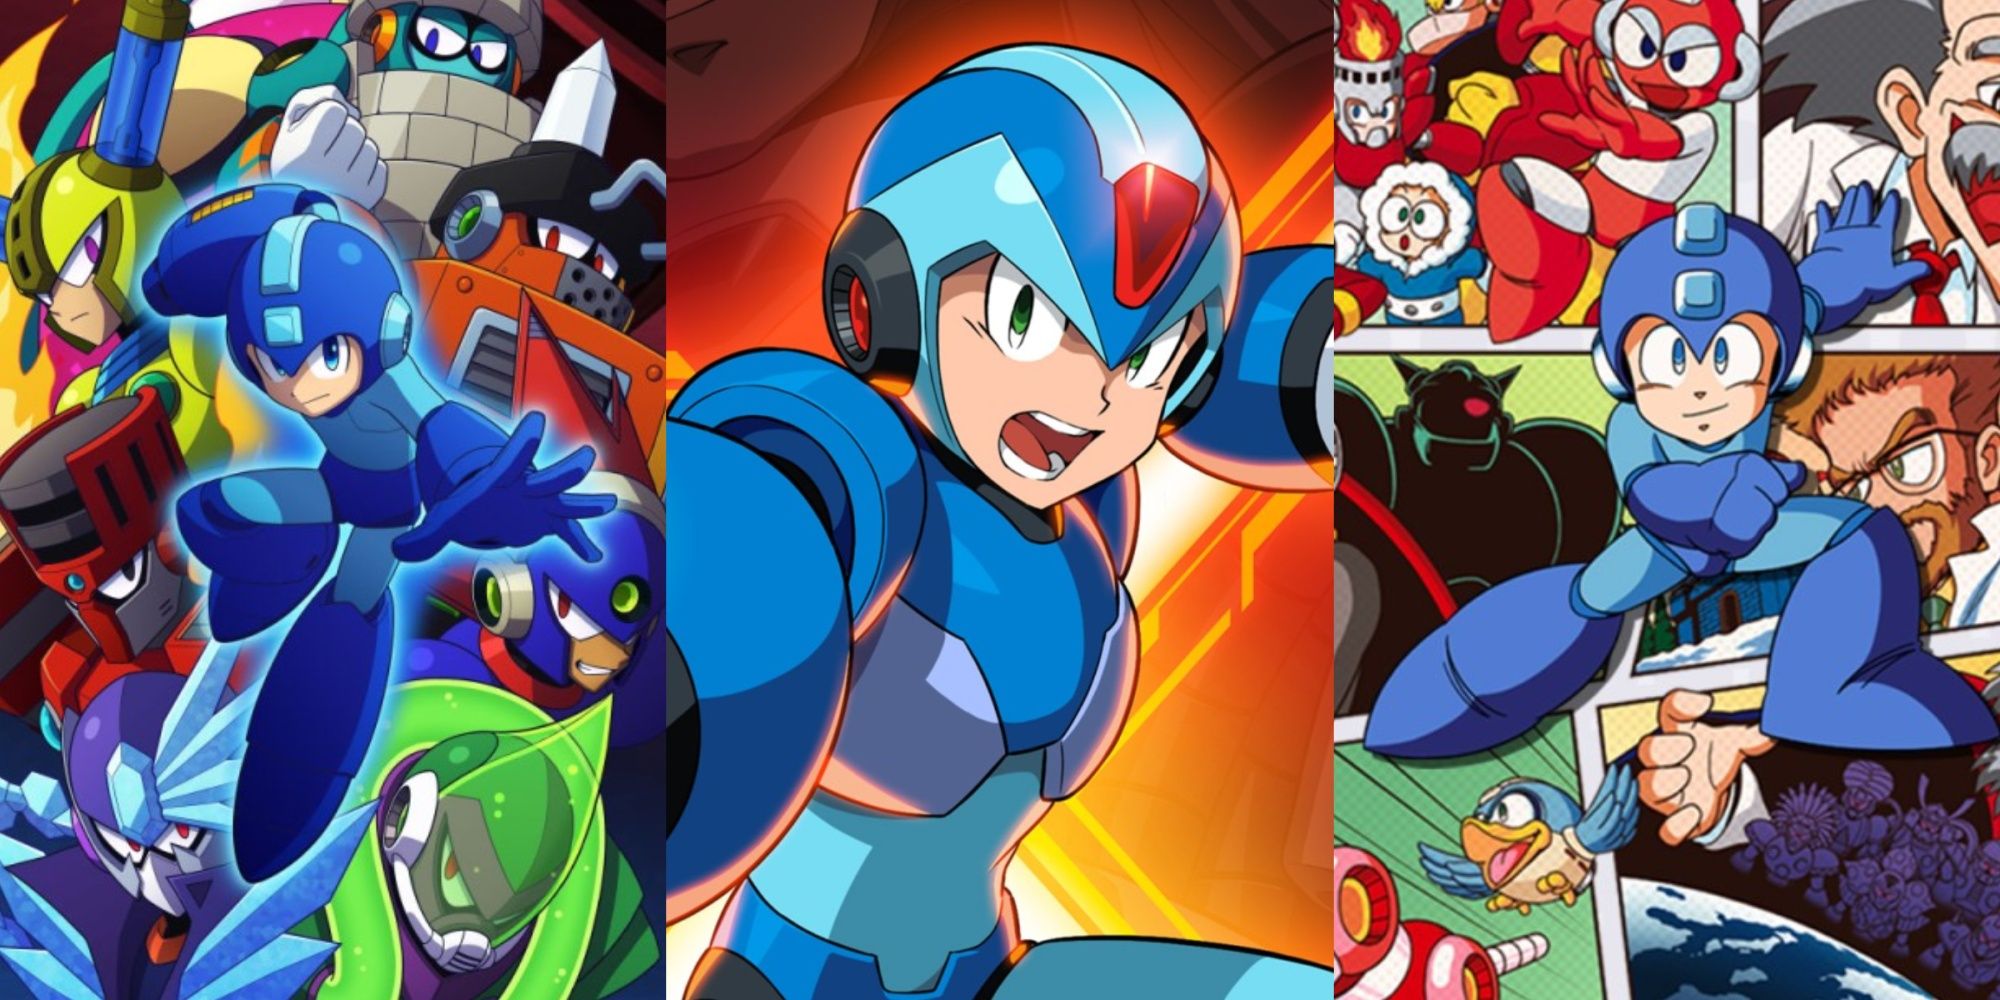 mega man 11, legacy x collection 2, and legacy collection cover art